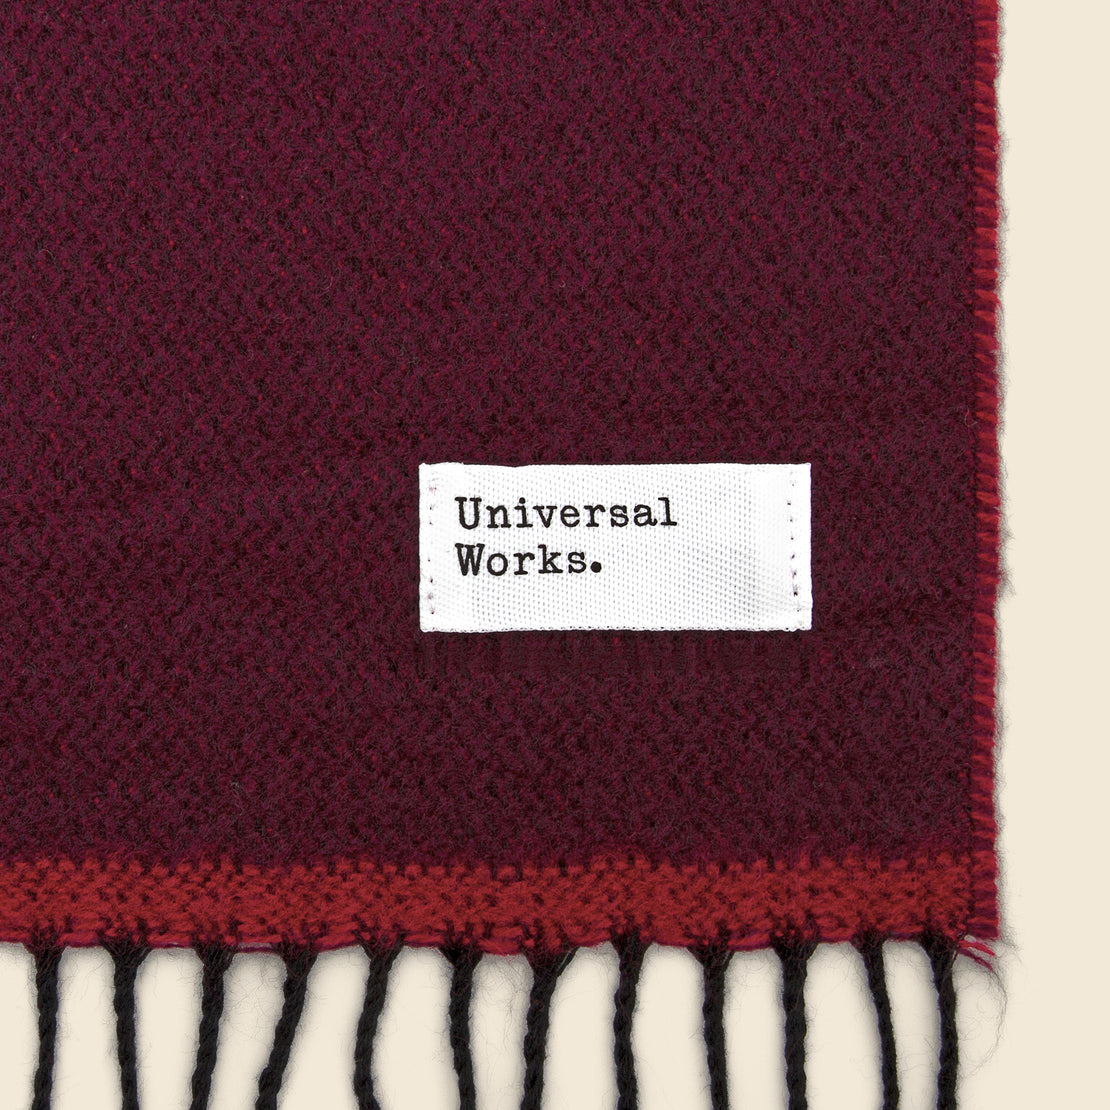 Double-Sided Scarf - Burgundy/Red - Universal Works - STAG Provisions - Accessories - Scarves